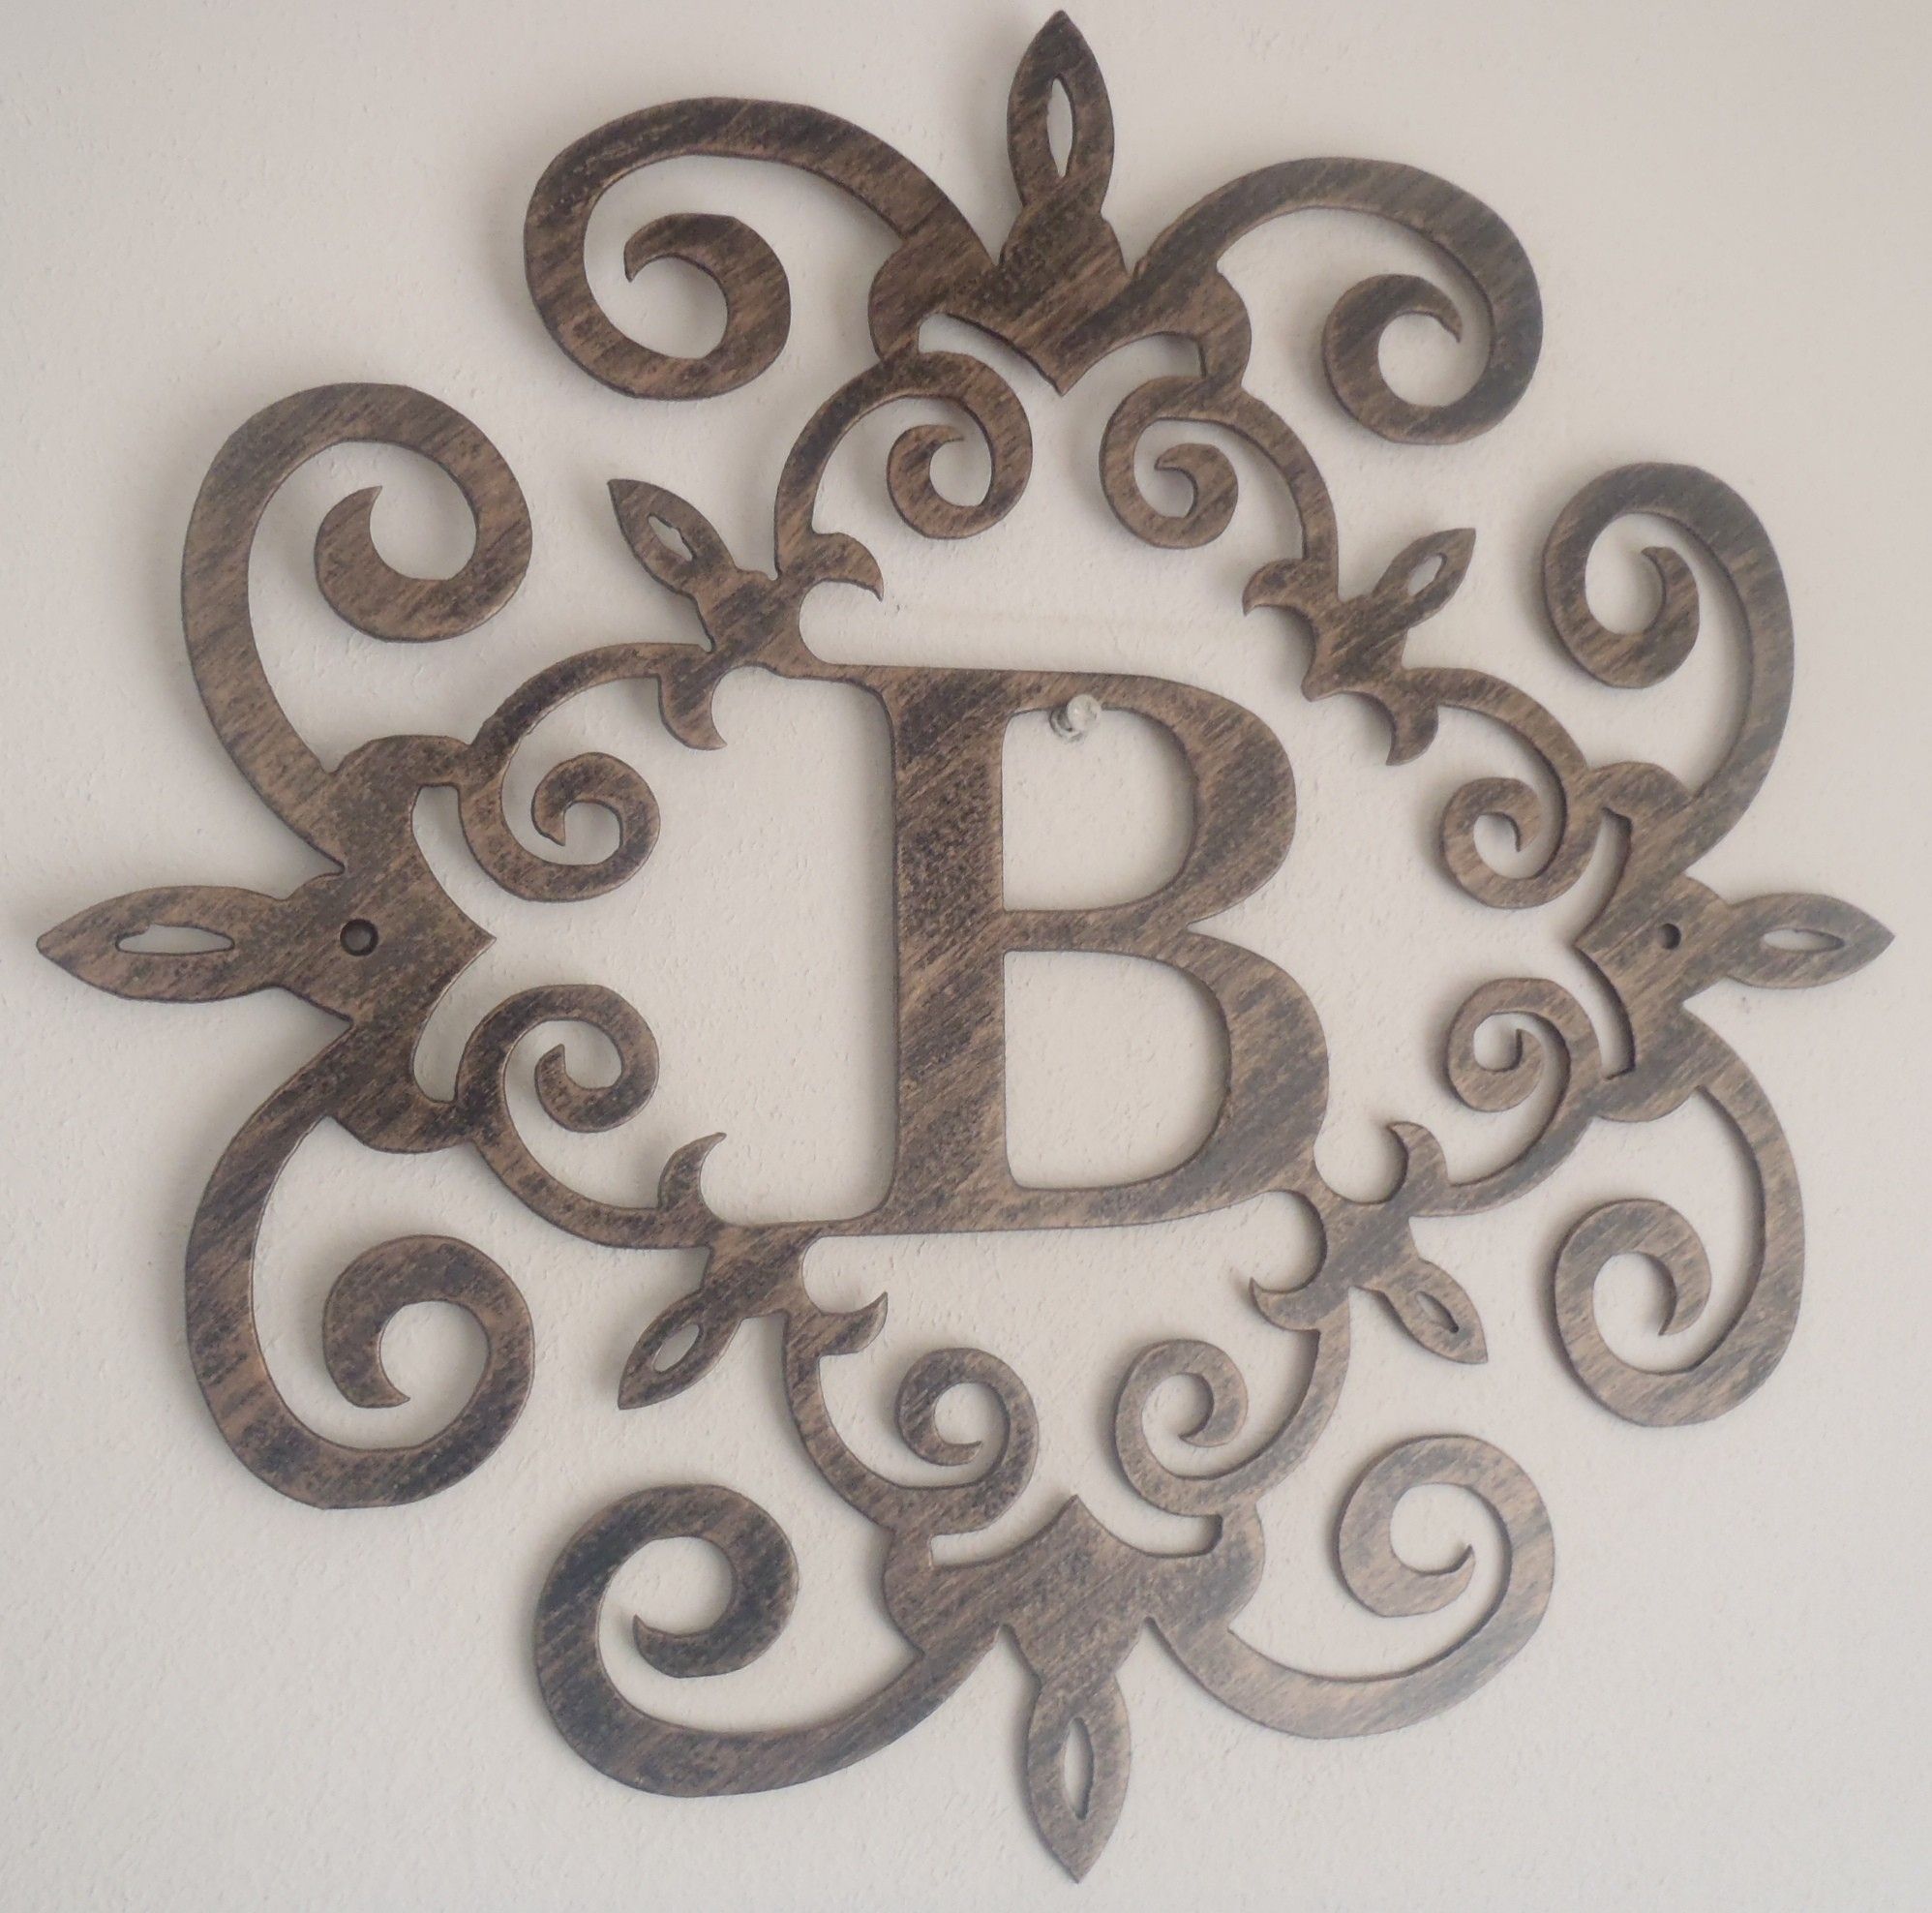 B Large Metal Letters For Wall Decor : Decorating Large Metal Pertaining To Metal Letter Wall Art (View 1 of 20)